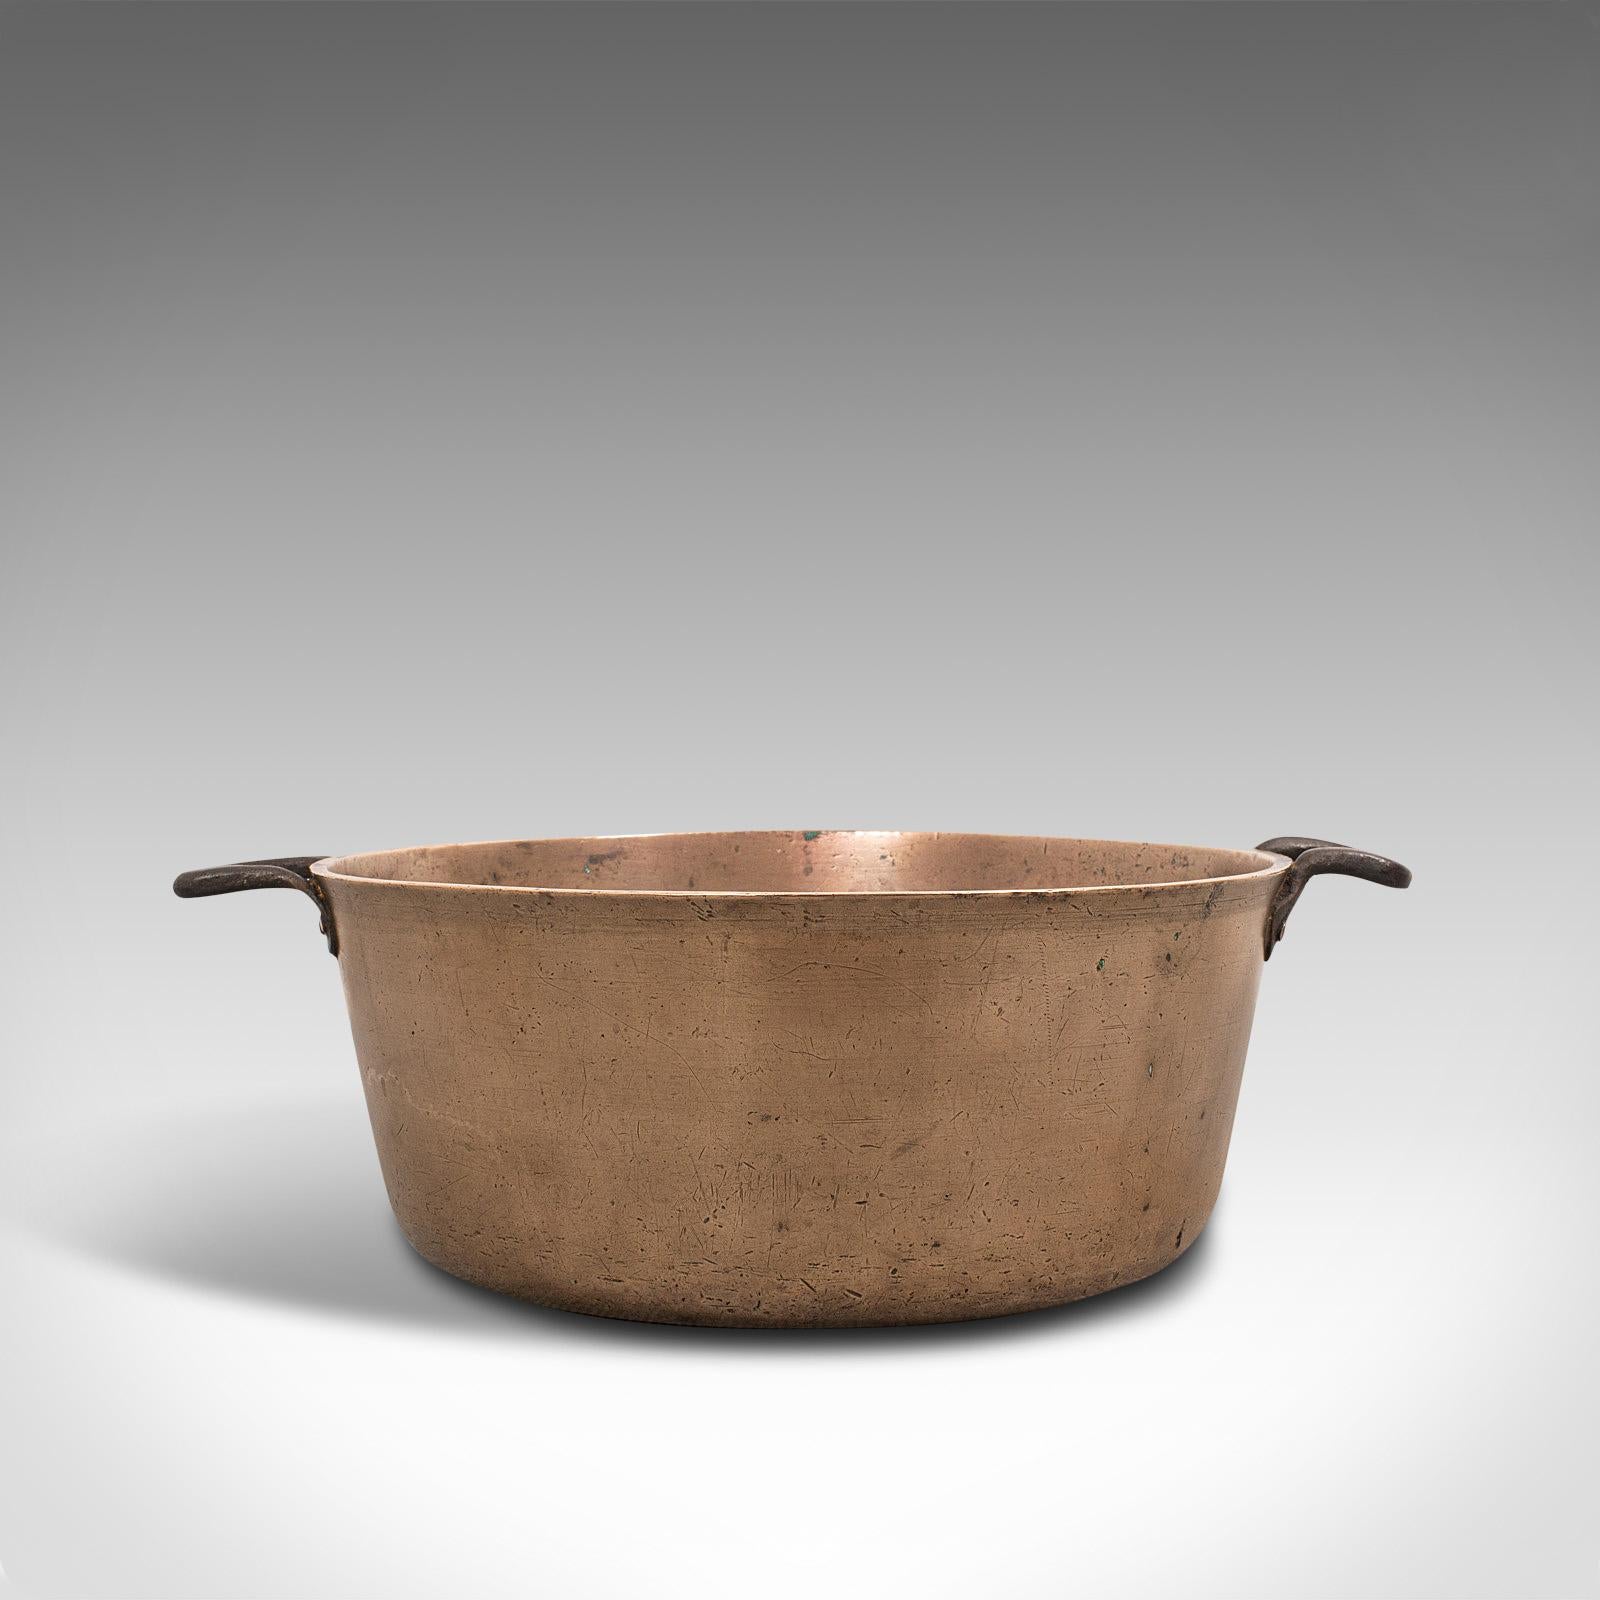 This is a superb antique jam pan. An English, heavy bronze preserves or cooking pot with iron handles, dating to the late 18th century, circa 1800.

Of superior weight and wonderfully aged
Displaying a desirable aged patina
Bronze shows